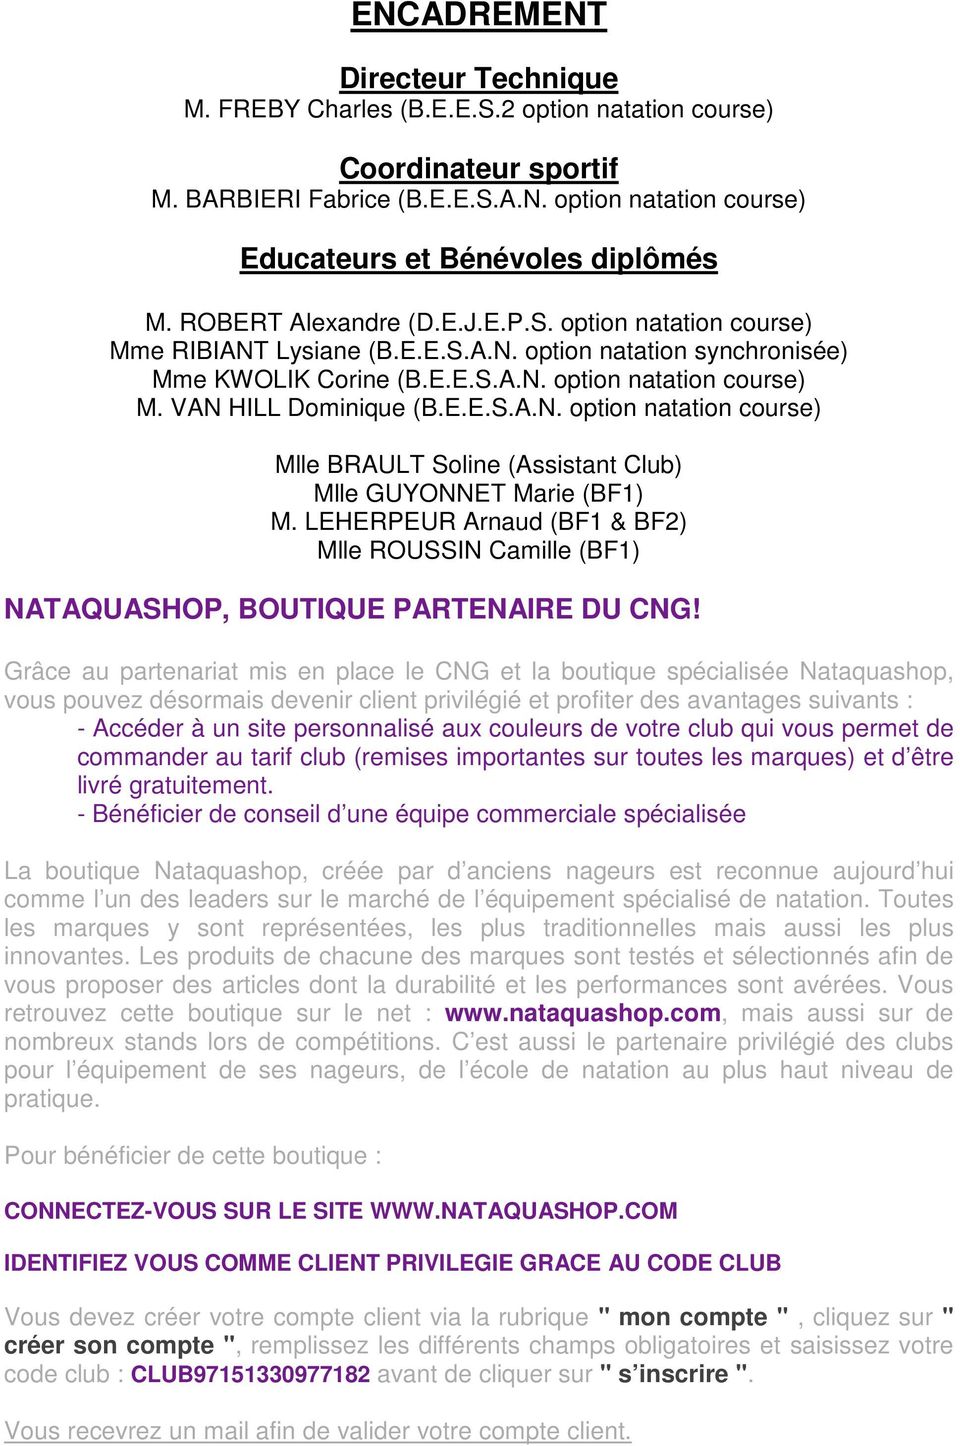 E.E.S.A.N. option natation course) Mlle BRAULT Soline (Assistant Club) Mlle GUYONNET Marie (BF1) M. LEHERPEUR Arnaud (BF1 & BF2) Mlle ROUSSIN Camille (BF1) NATAQUASHOP, BOUTIQUE PARTENAIRE DU CNG!